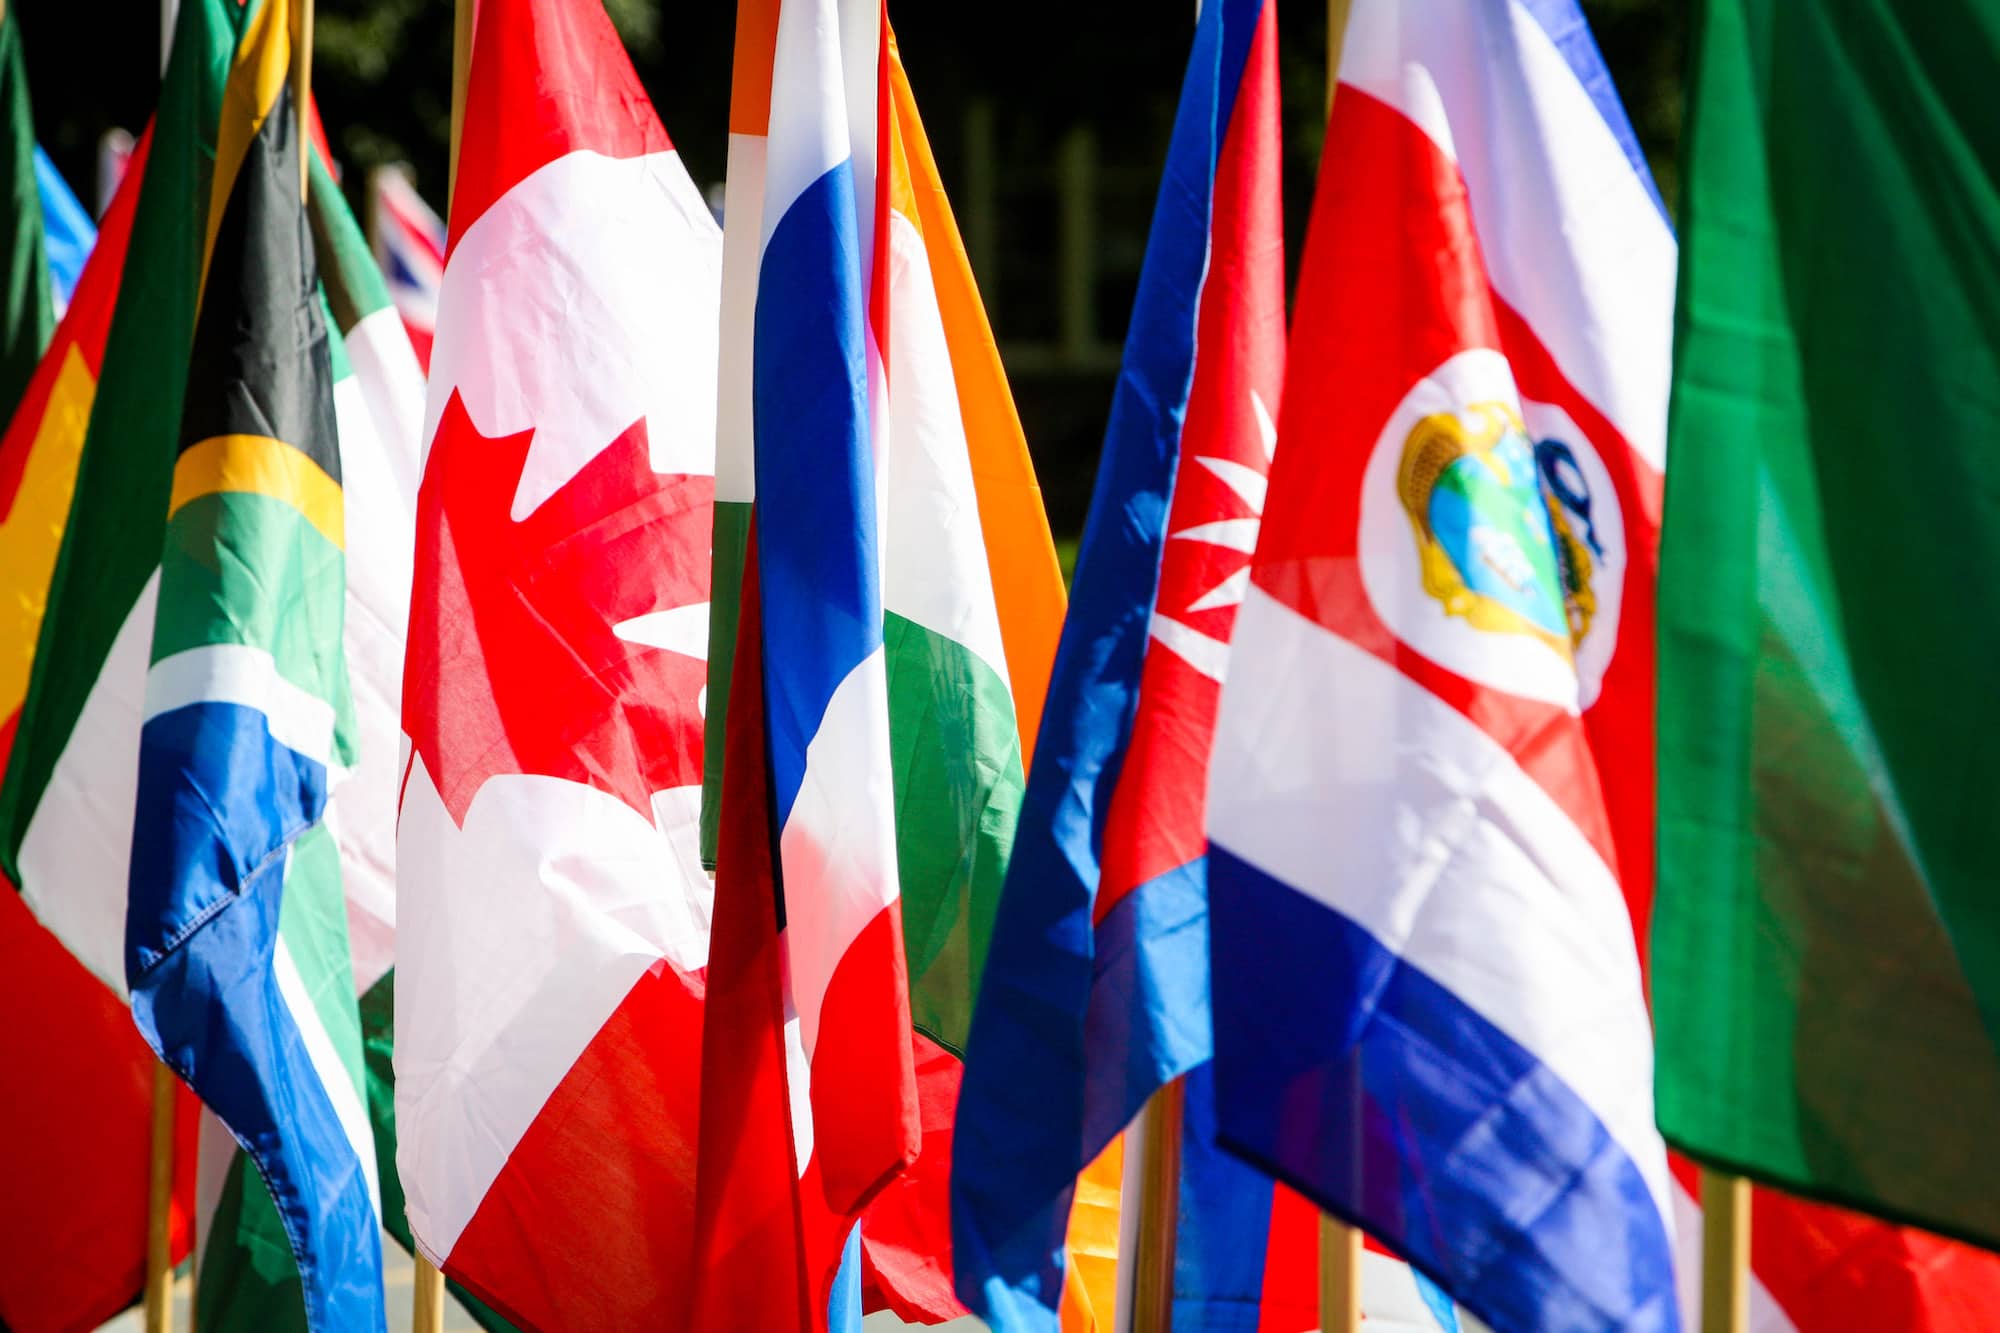 Detail of flags from different countries